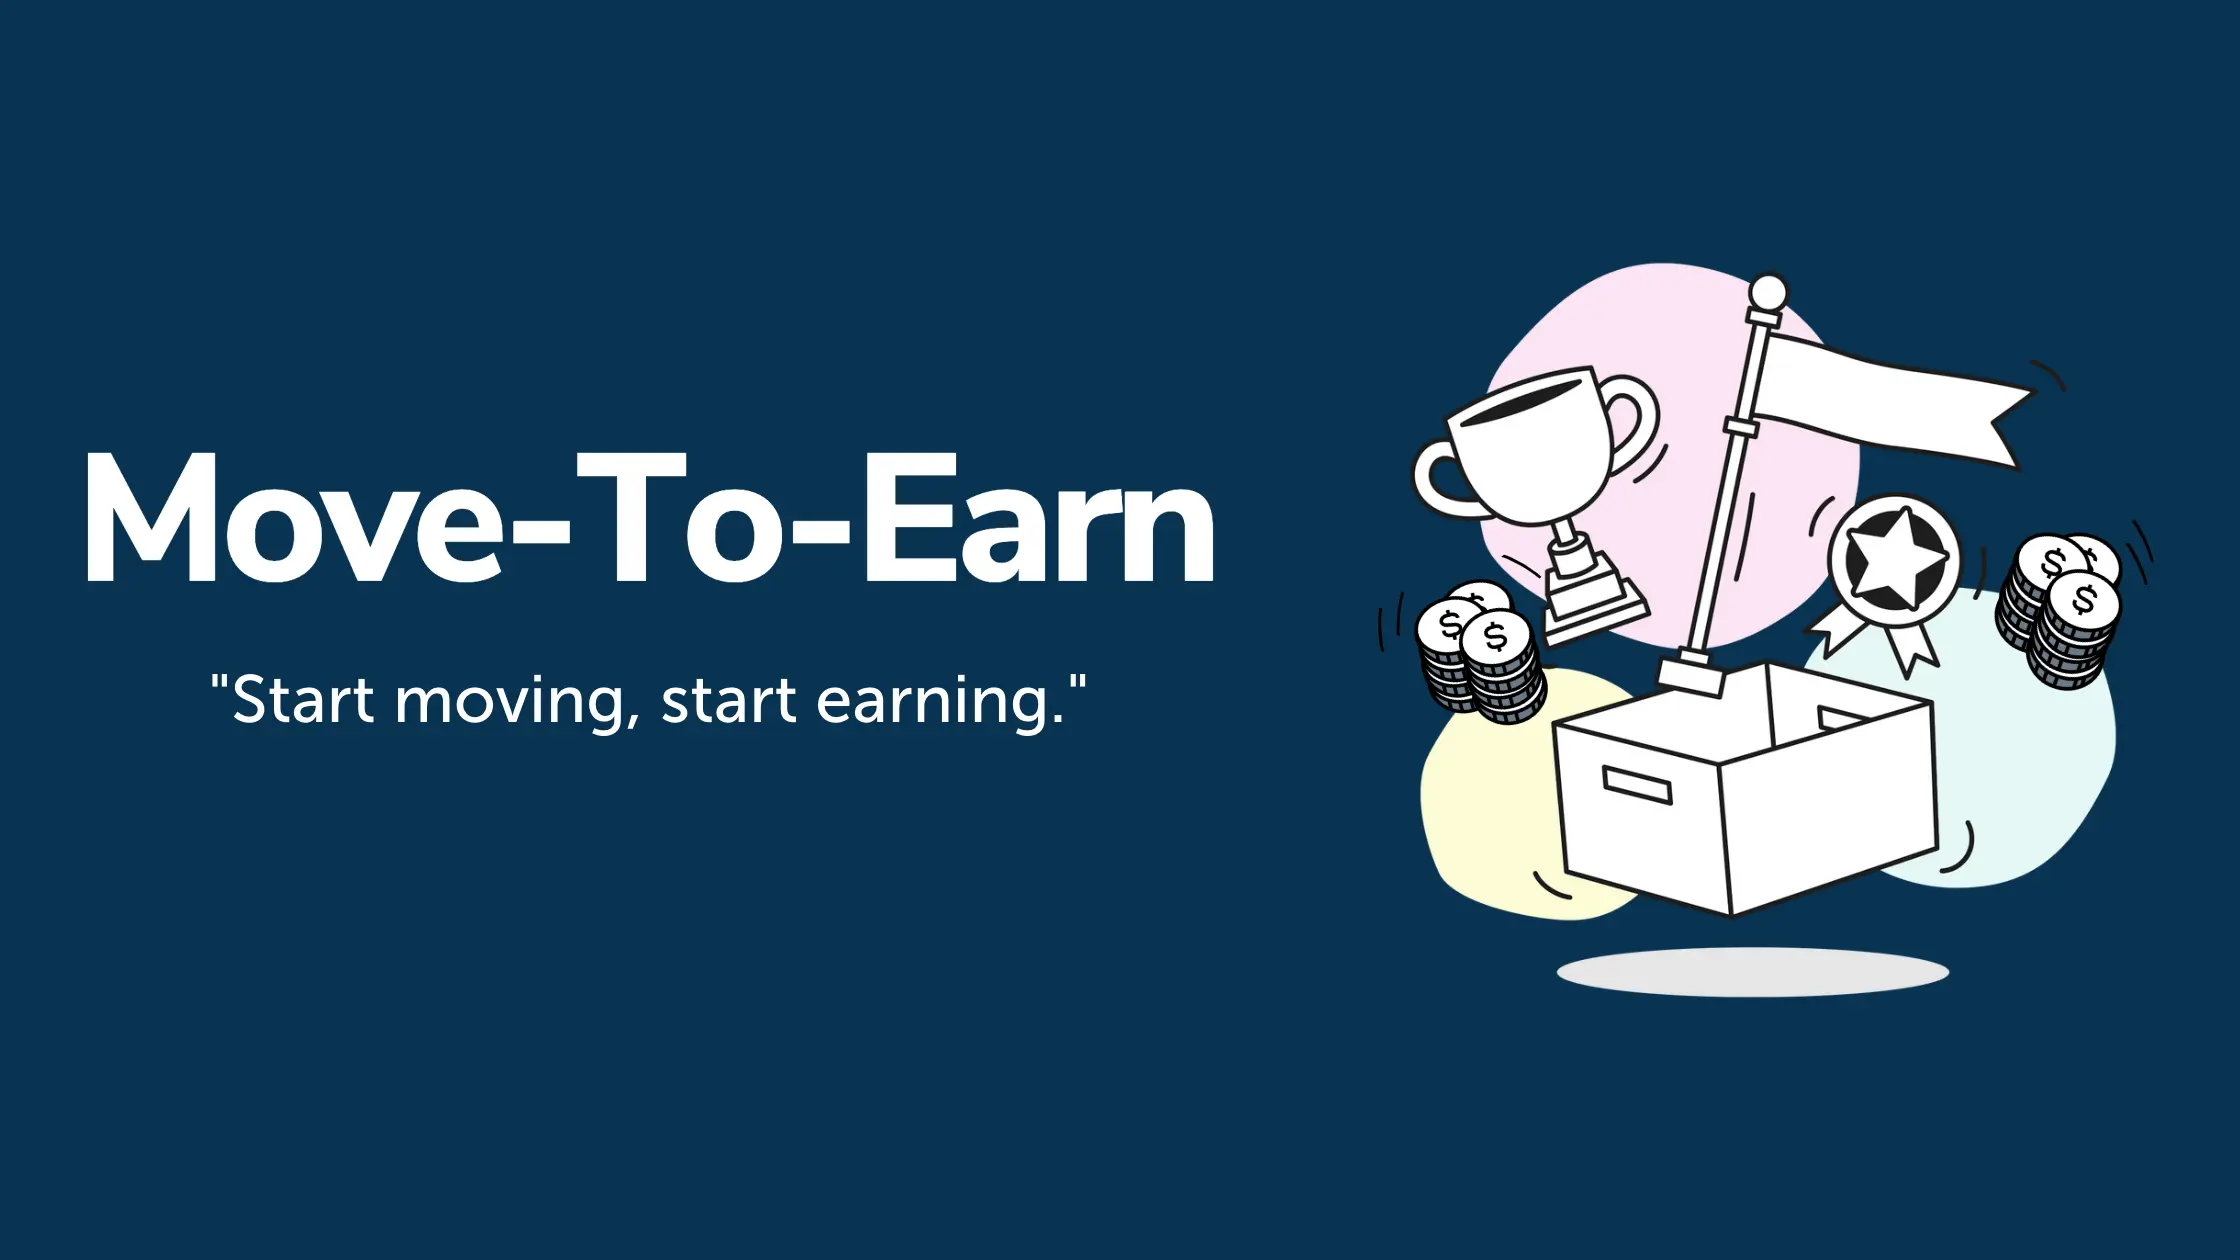 Move-To-Earn: Get rewarded for activity